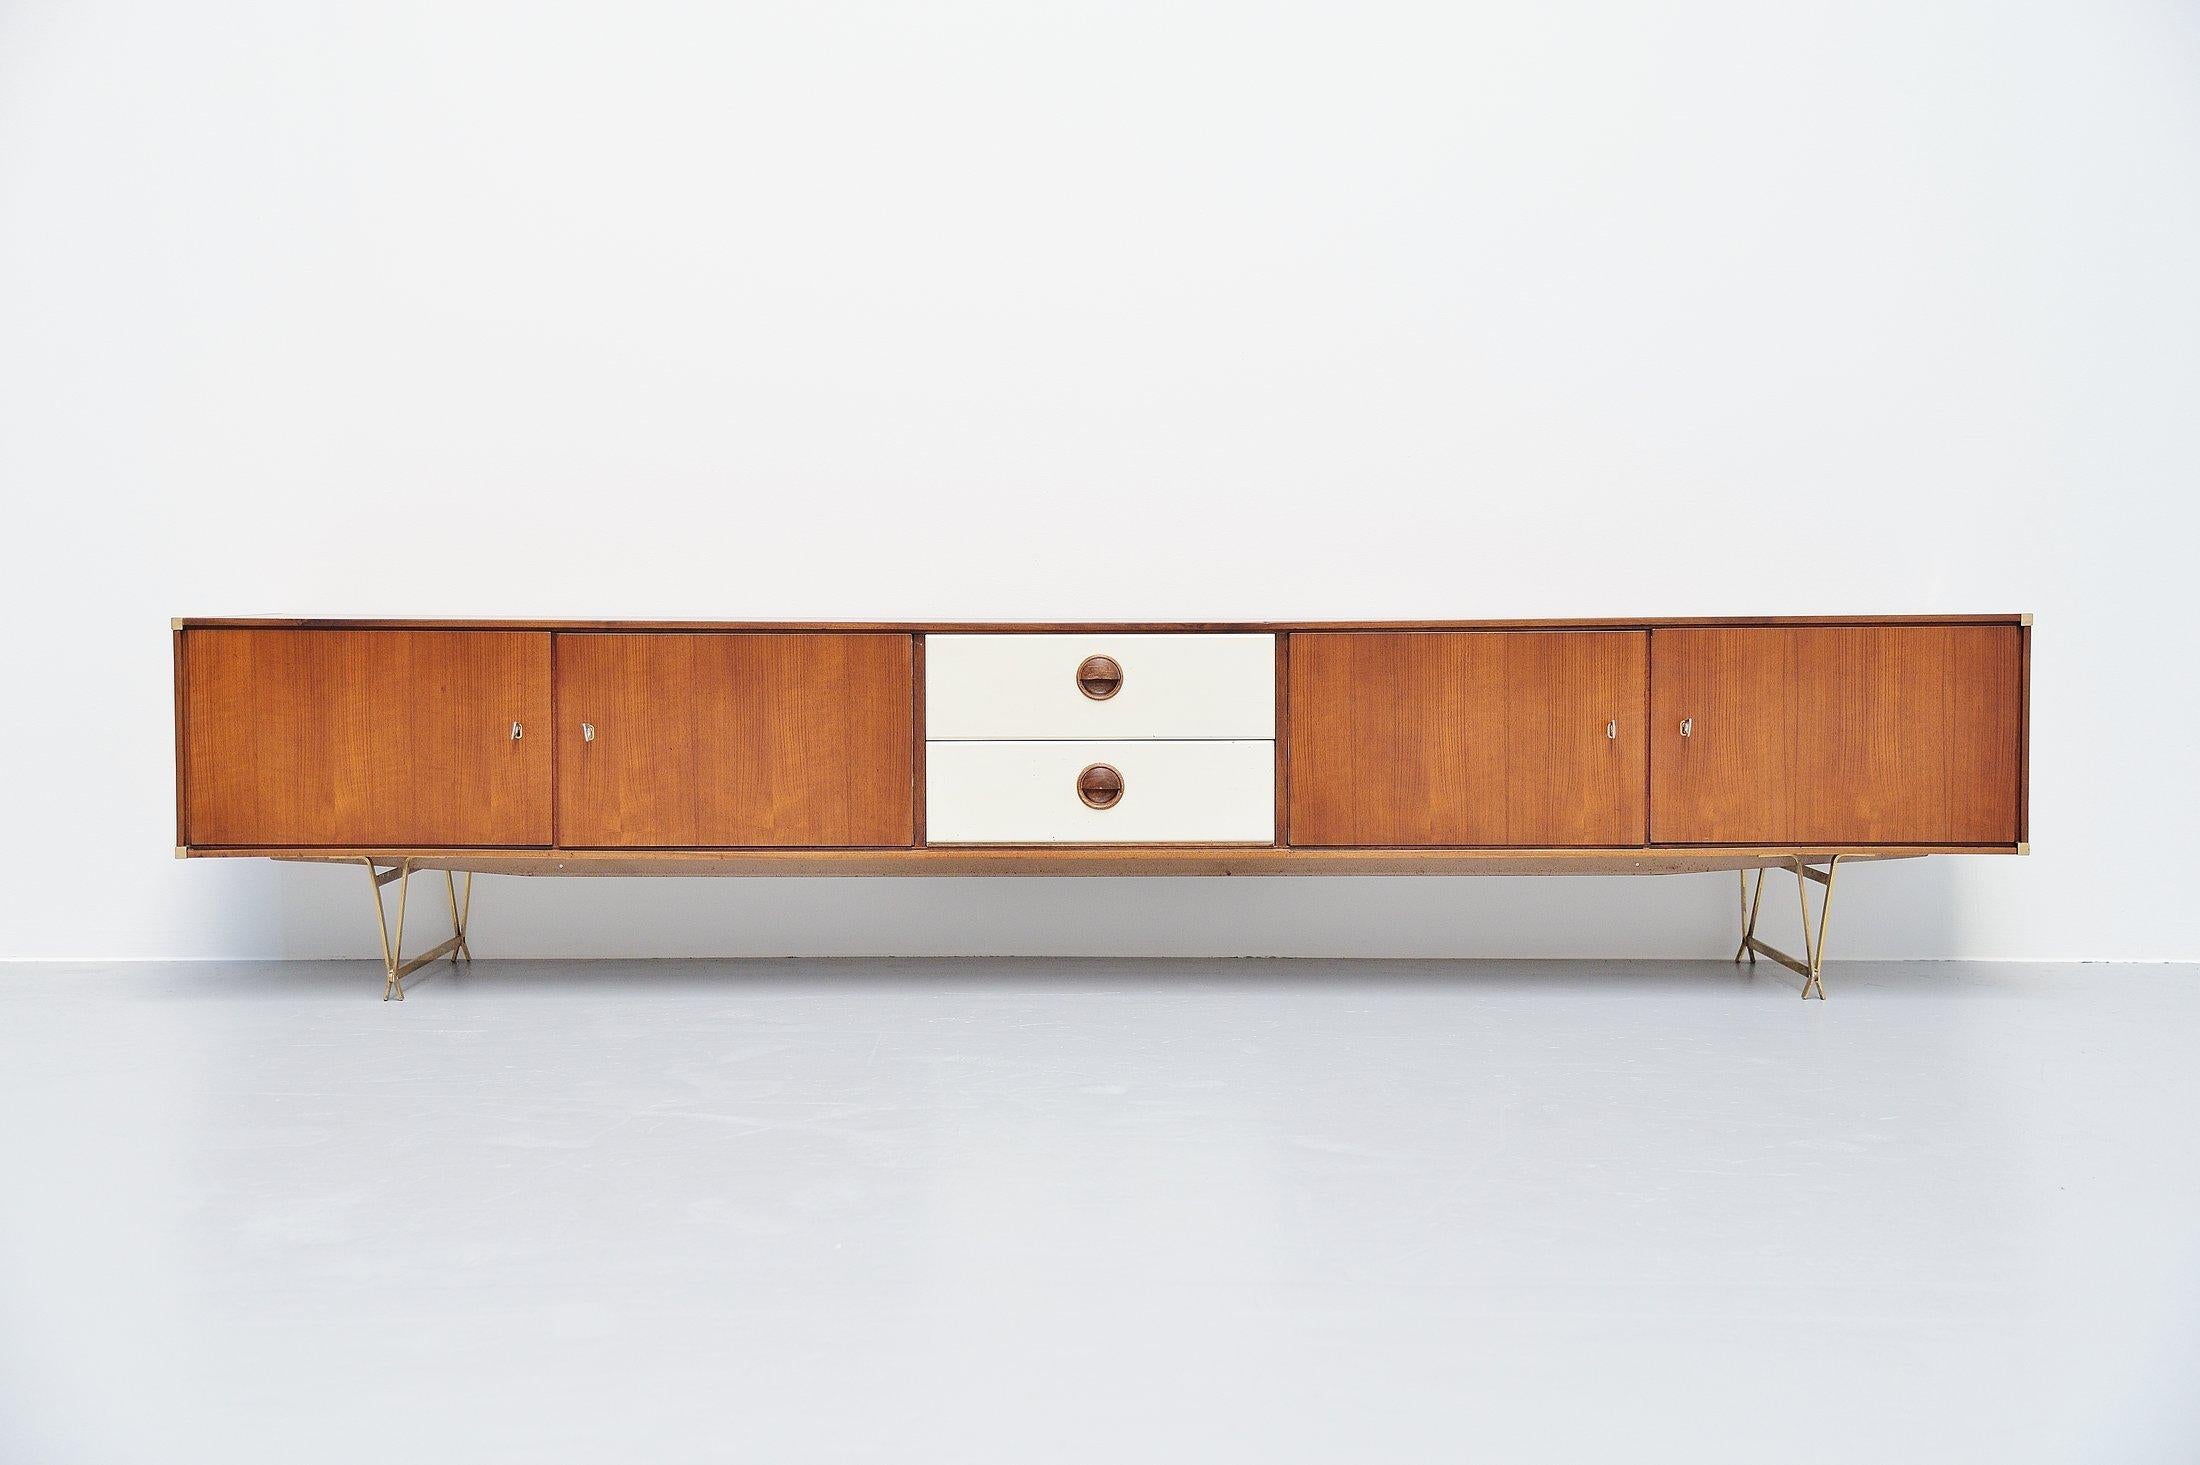 Ultra rare low sideboard designed by Wim Crouwel and manufactured by Fristho Franeker, Holland, 1954. This low sideboard has a fantastic modernist shape and typical Fristho details. The legs are in brass, the corners are made of solid brass as well.